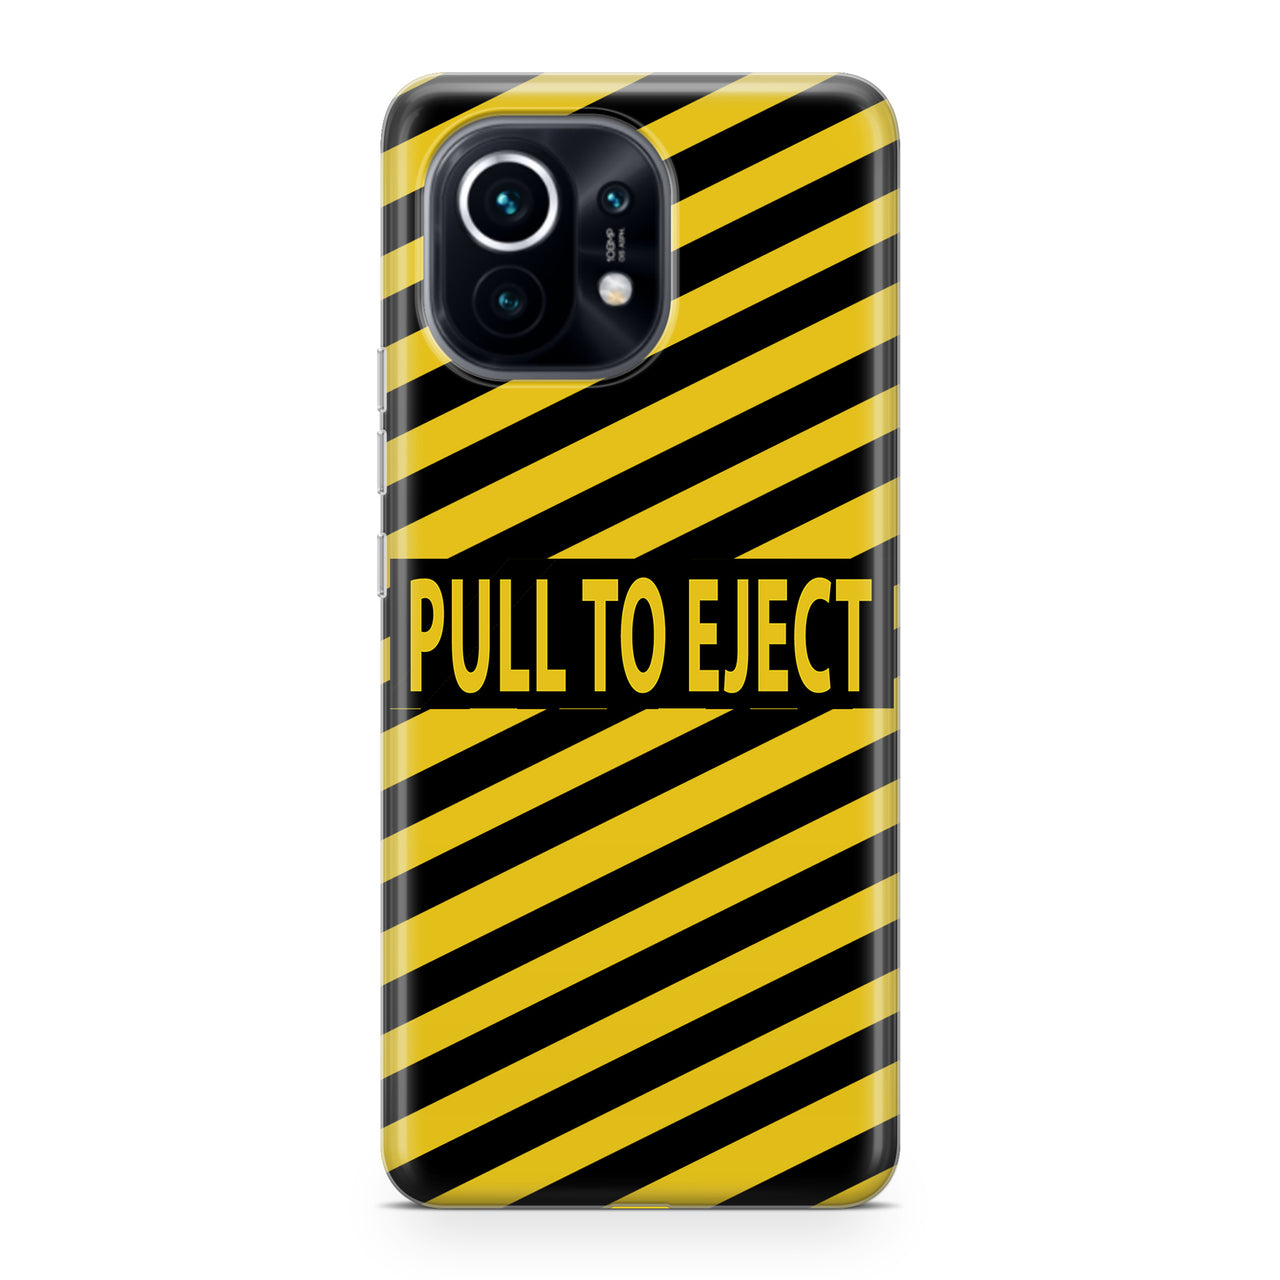 Pull to Eject Designed Xiaomi Cases